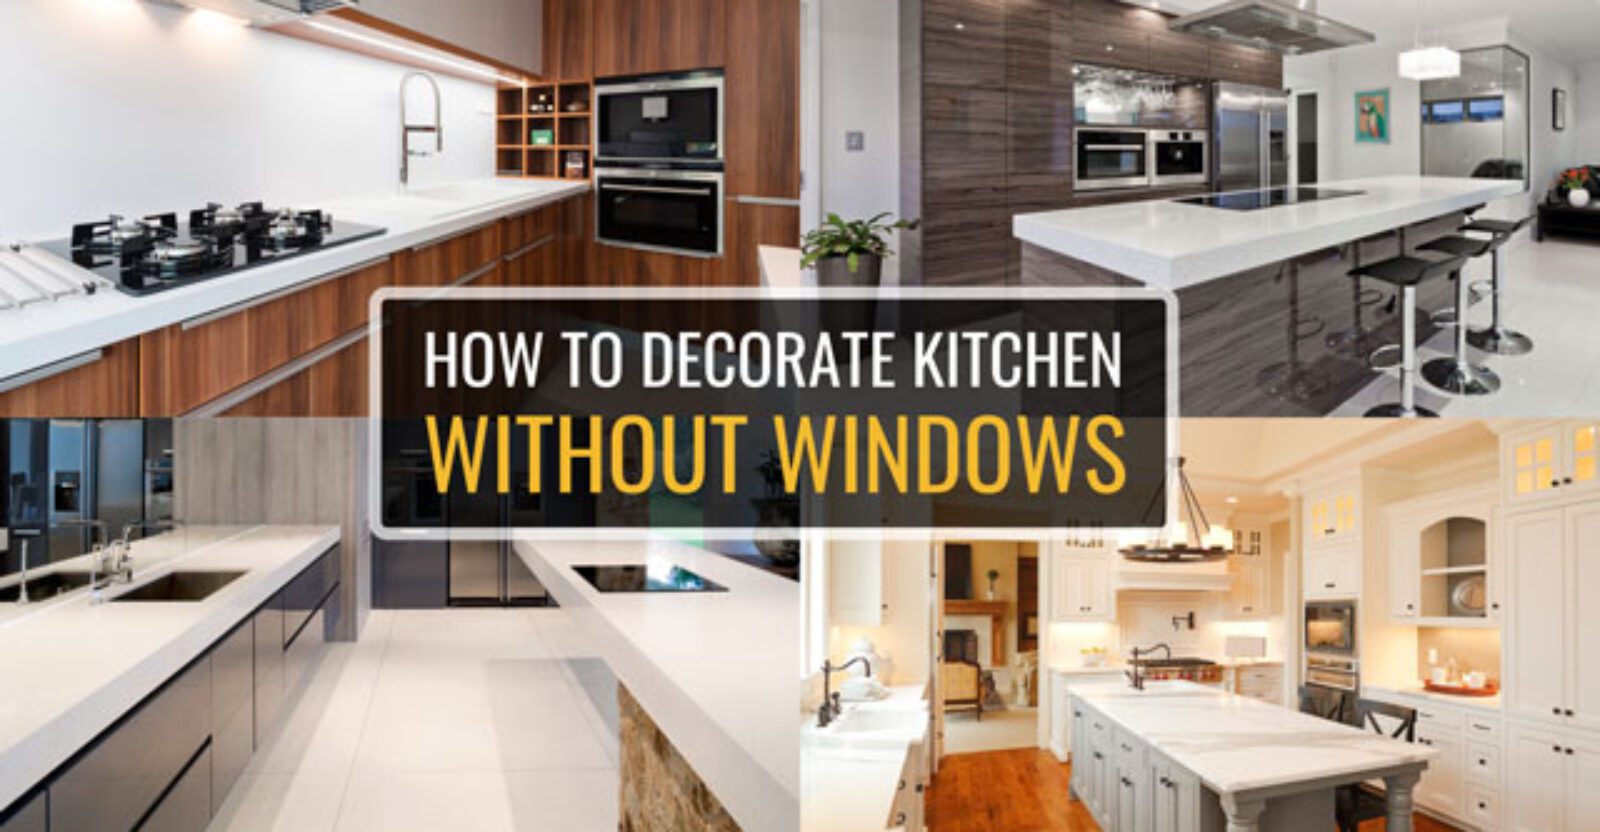 How To Decorate A Kitchen Without Windows 1600x832 